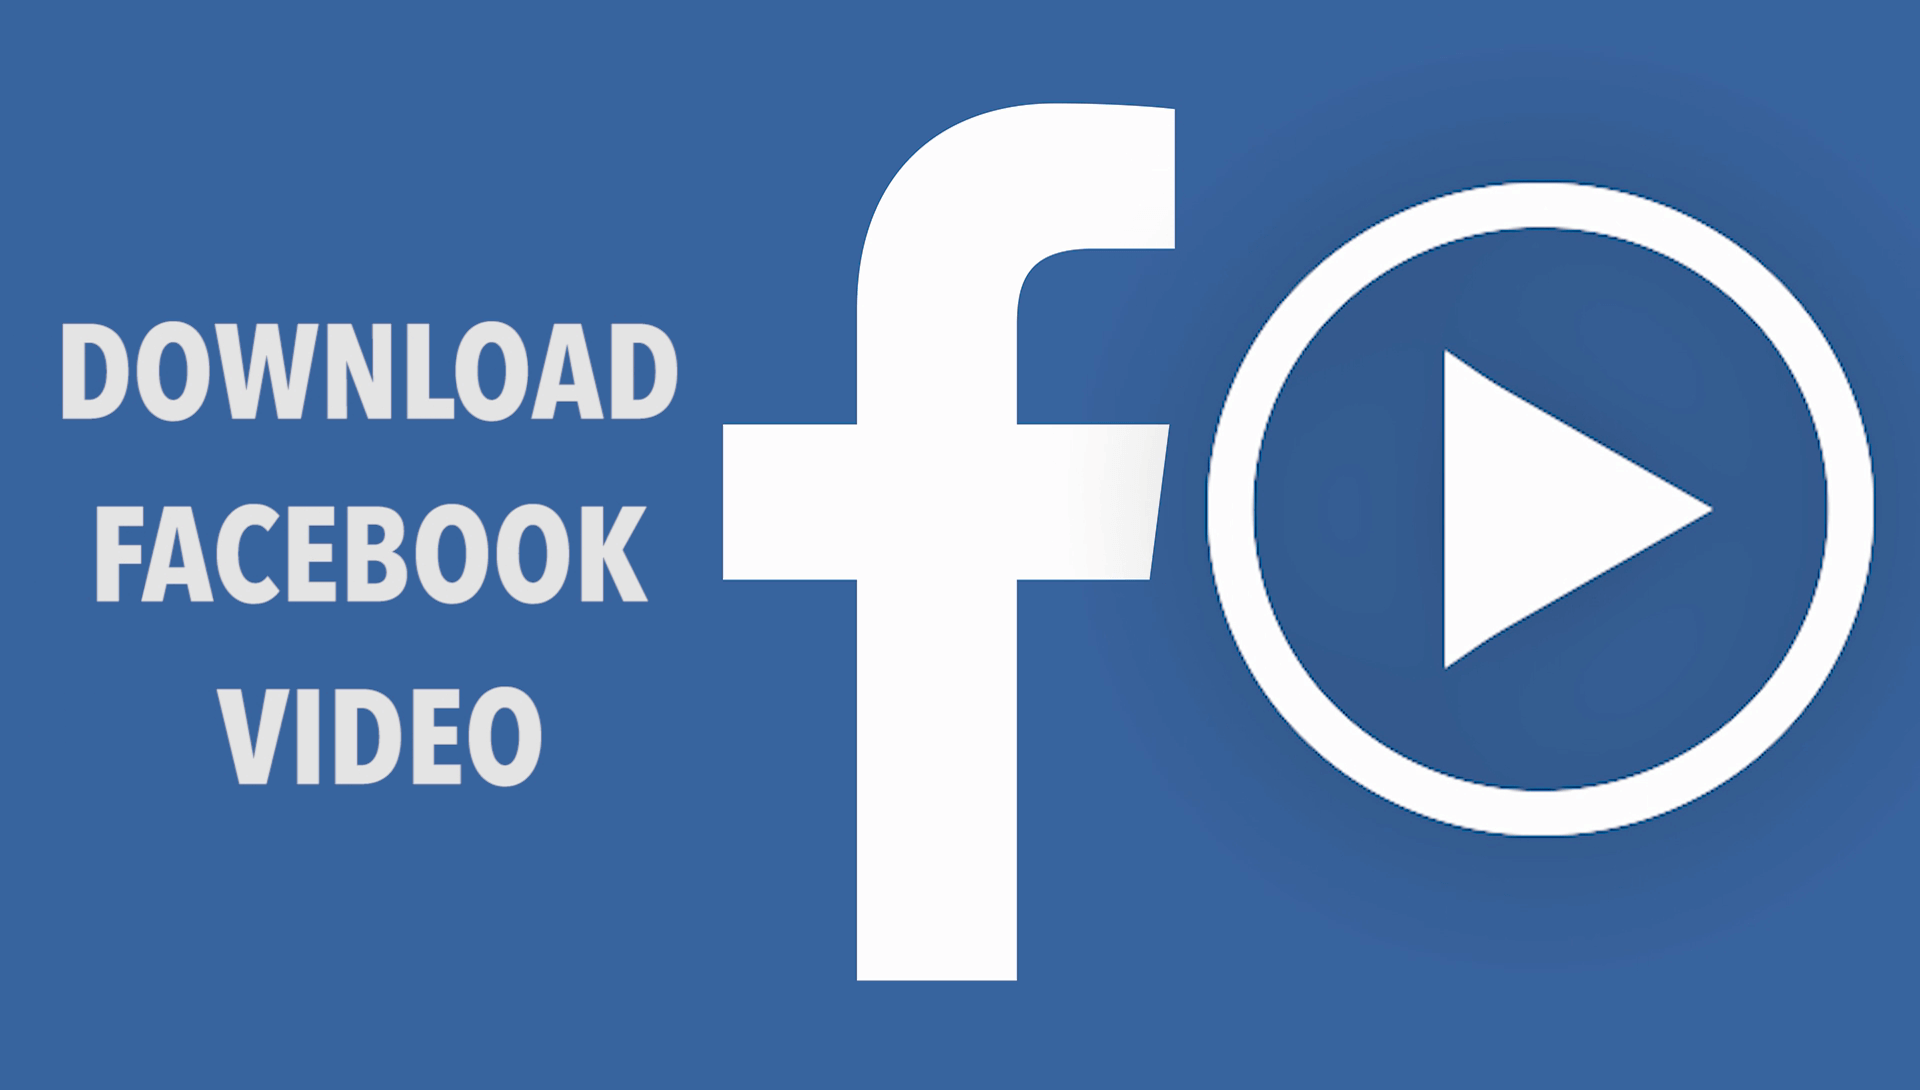 Facebook Video Downloader Emerges as Popular Tool among Americans)